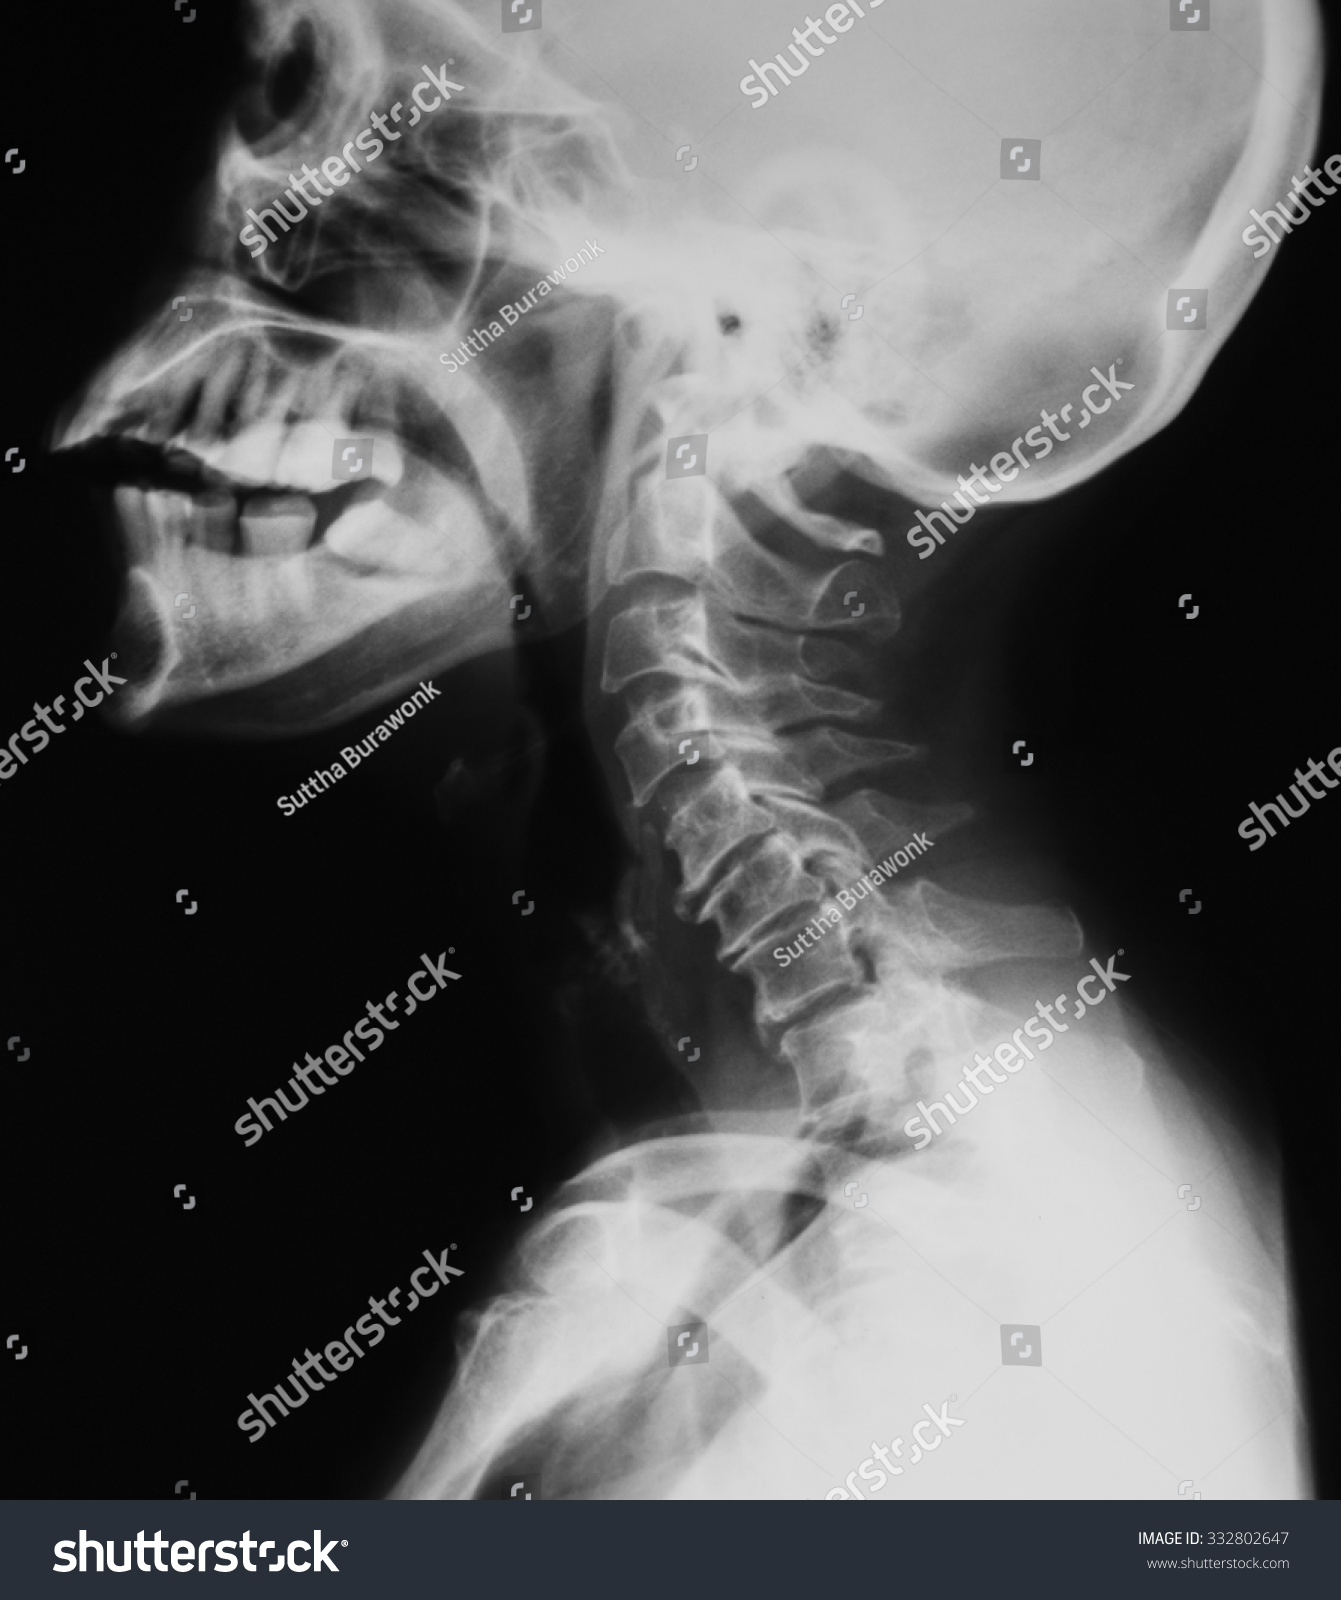 Xray Image Cervical Spine View Shows Stock Photo 332802647 ...